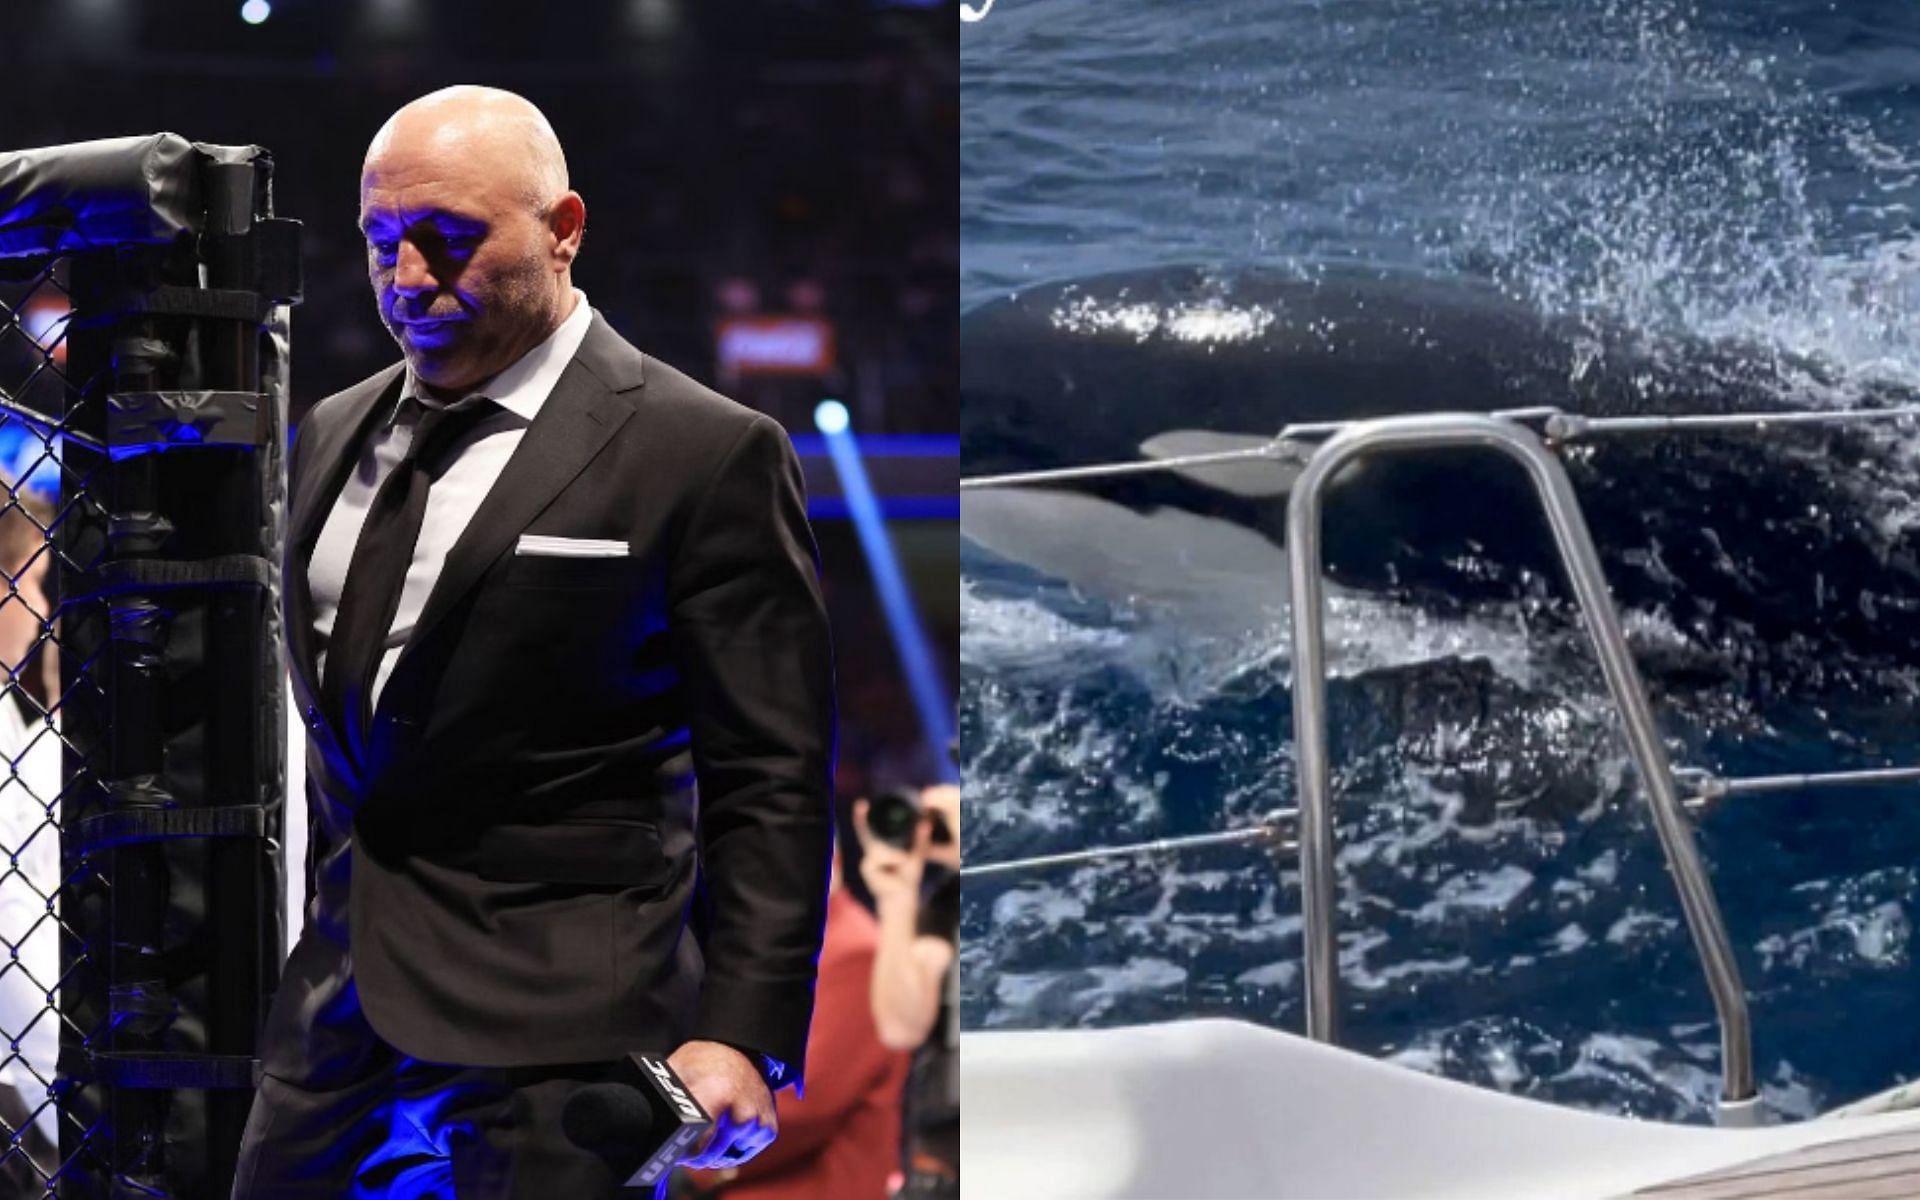 Joe Rogan,(left) A whale pictured near a boat (right) [Image source of the whale: @Telegrah on Twitter]